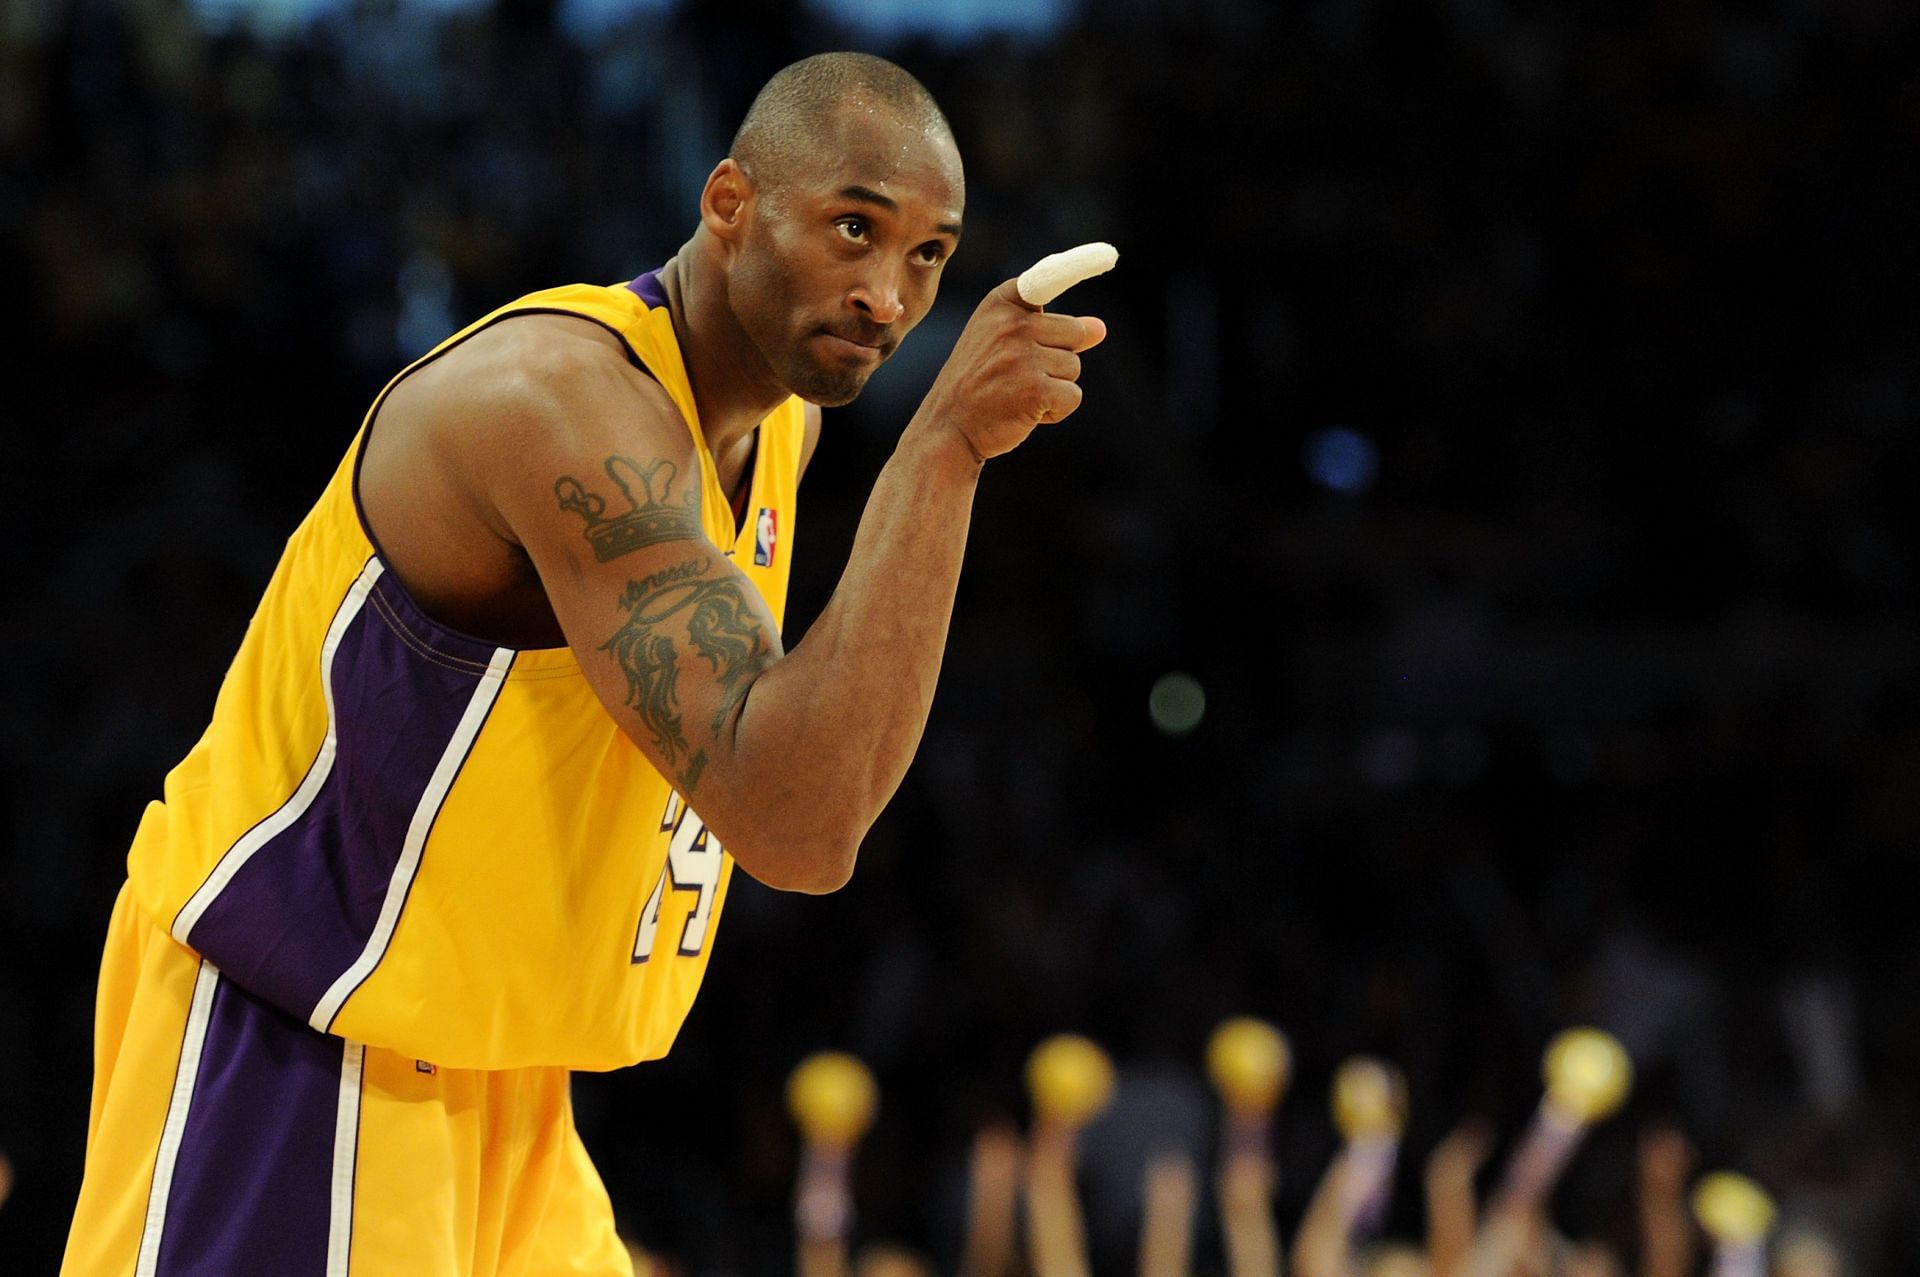 LA Lakers superstar Kobe Bryant was known for his competitive nature.